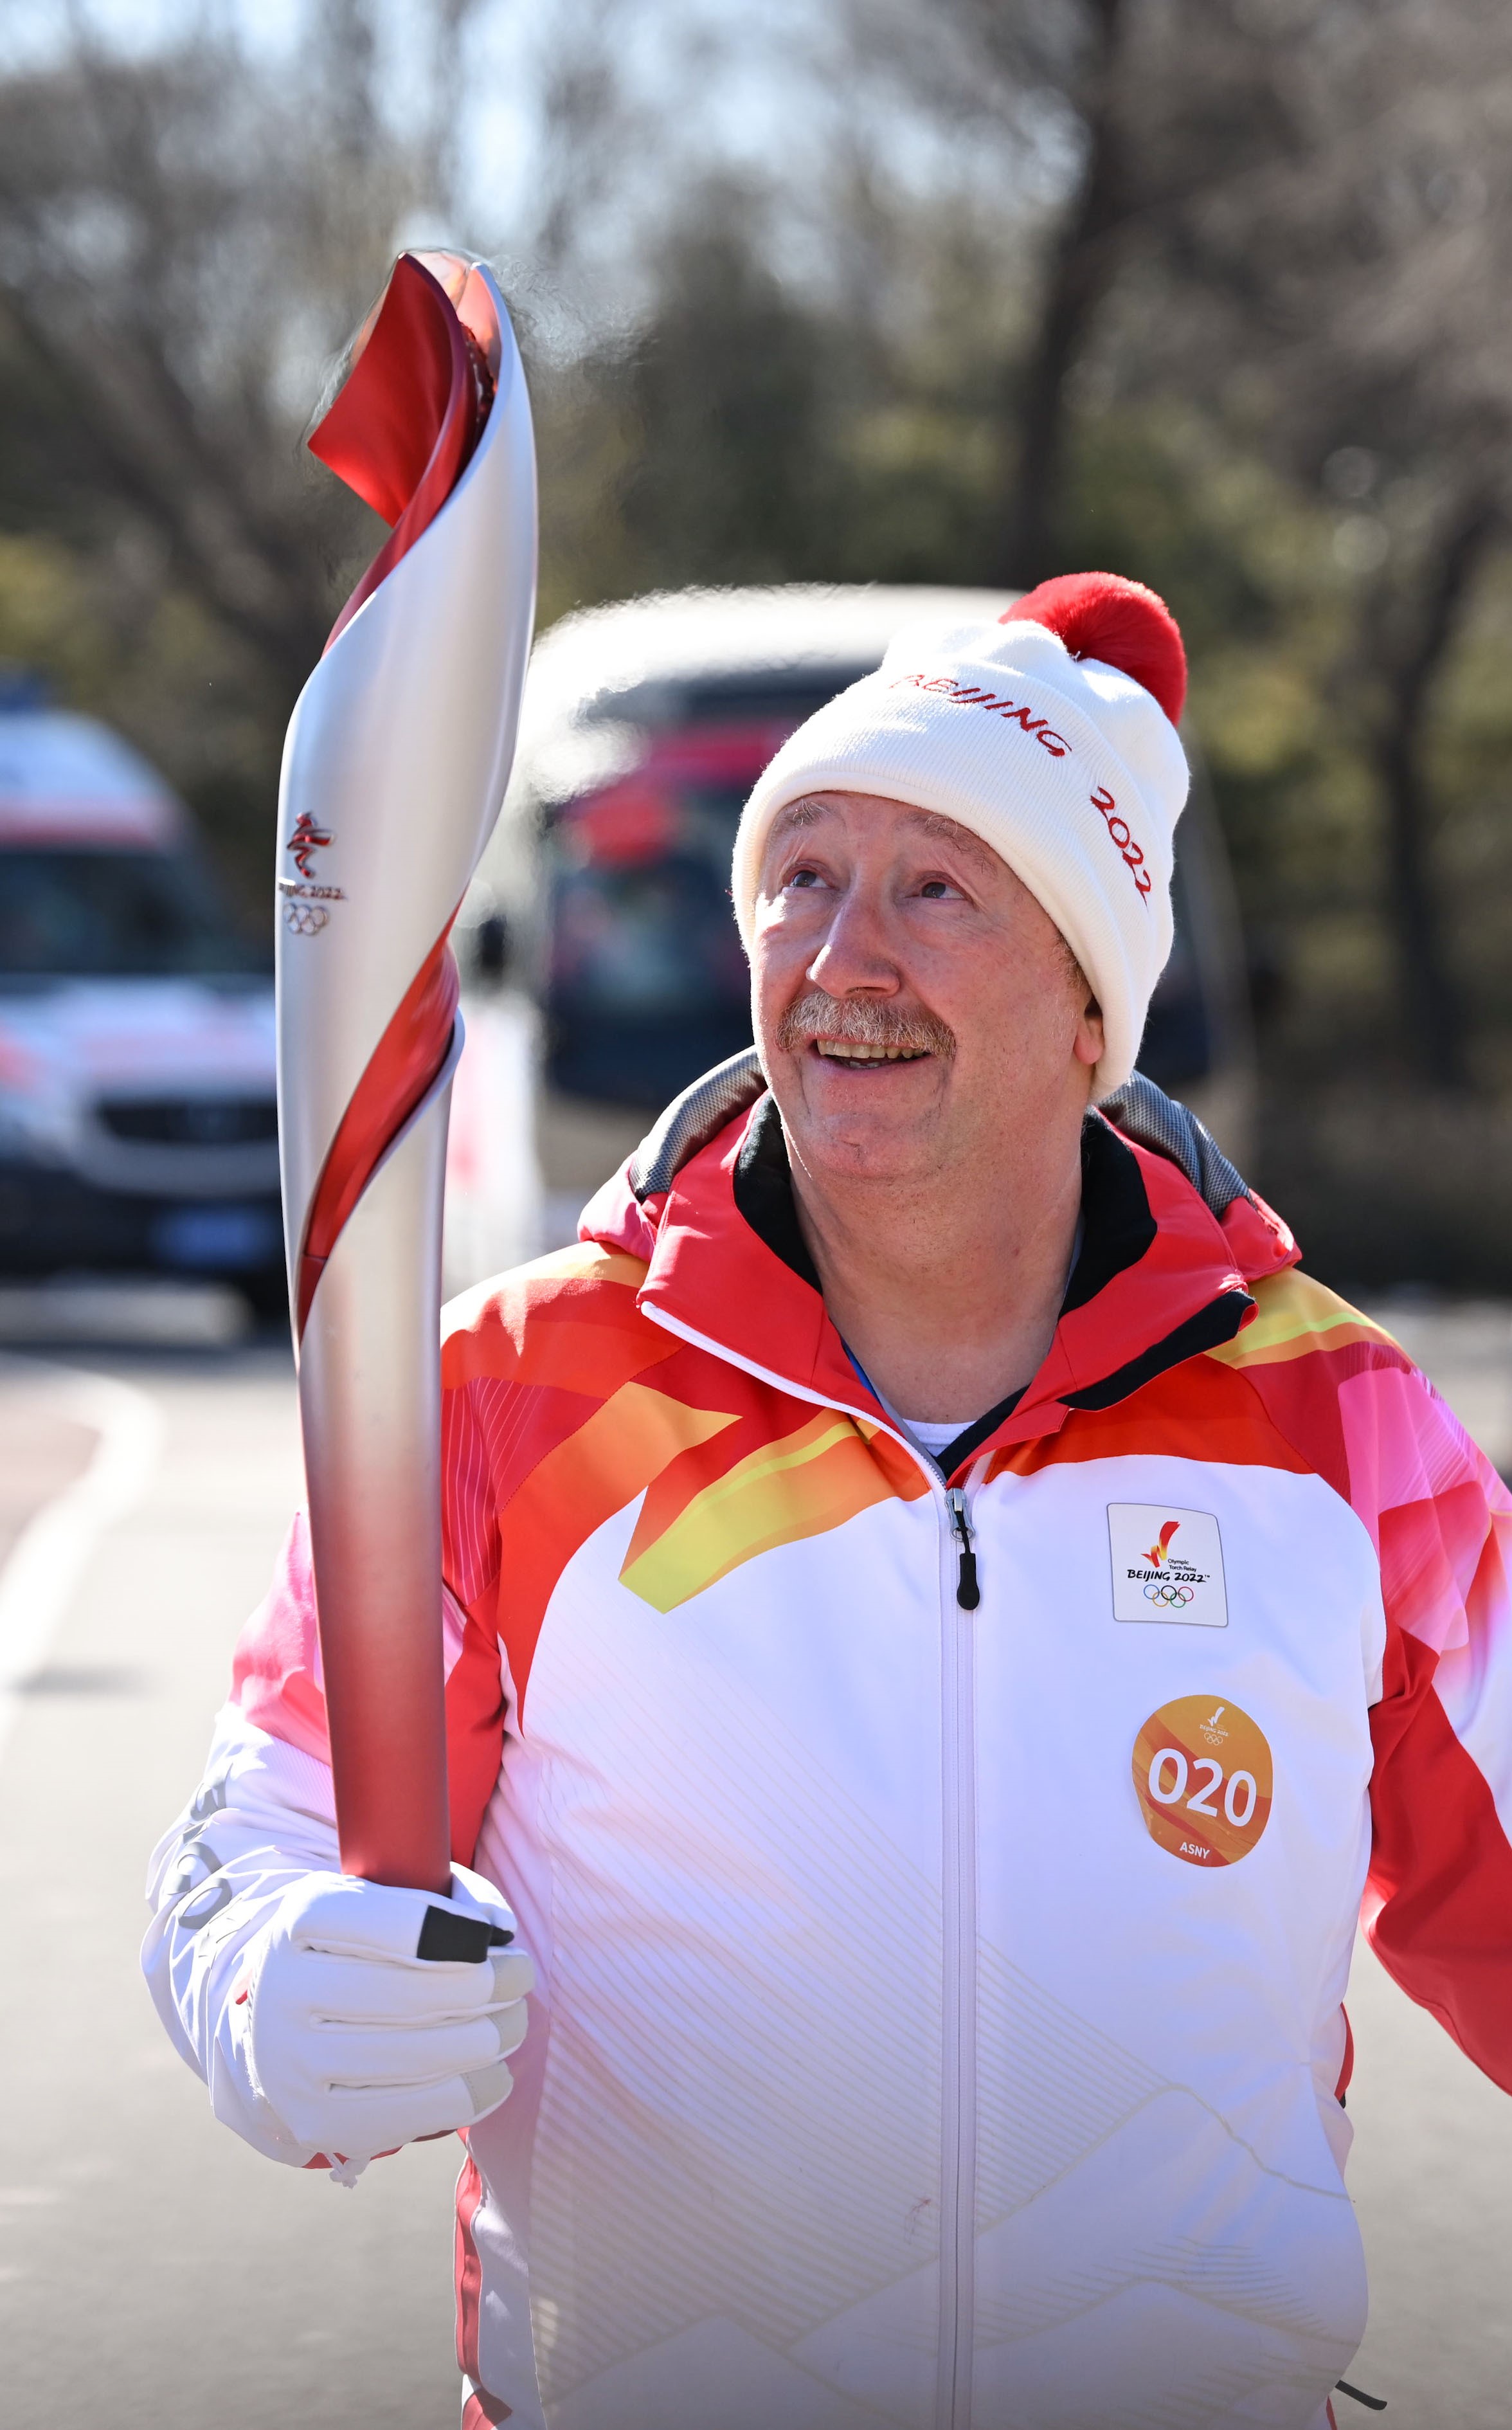 Marc Ventouillac runs with the torch during the Beijing 2022 Olympic Torch Relay at the Olympic Forest Park in Beijing Feb. 4.